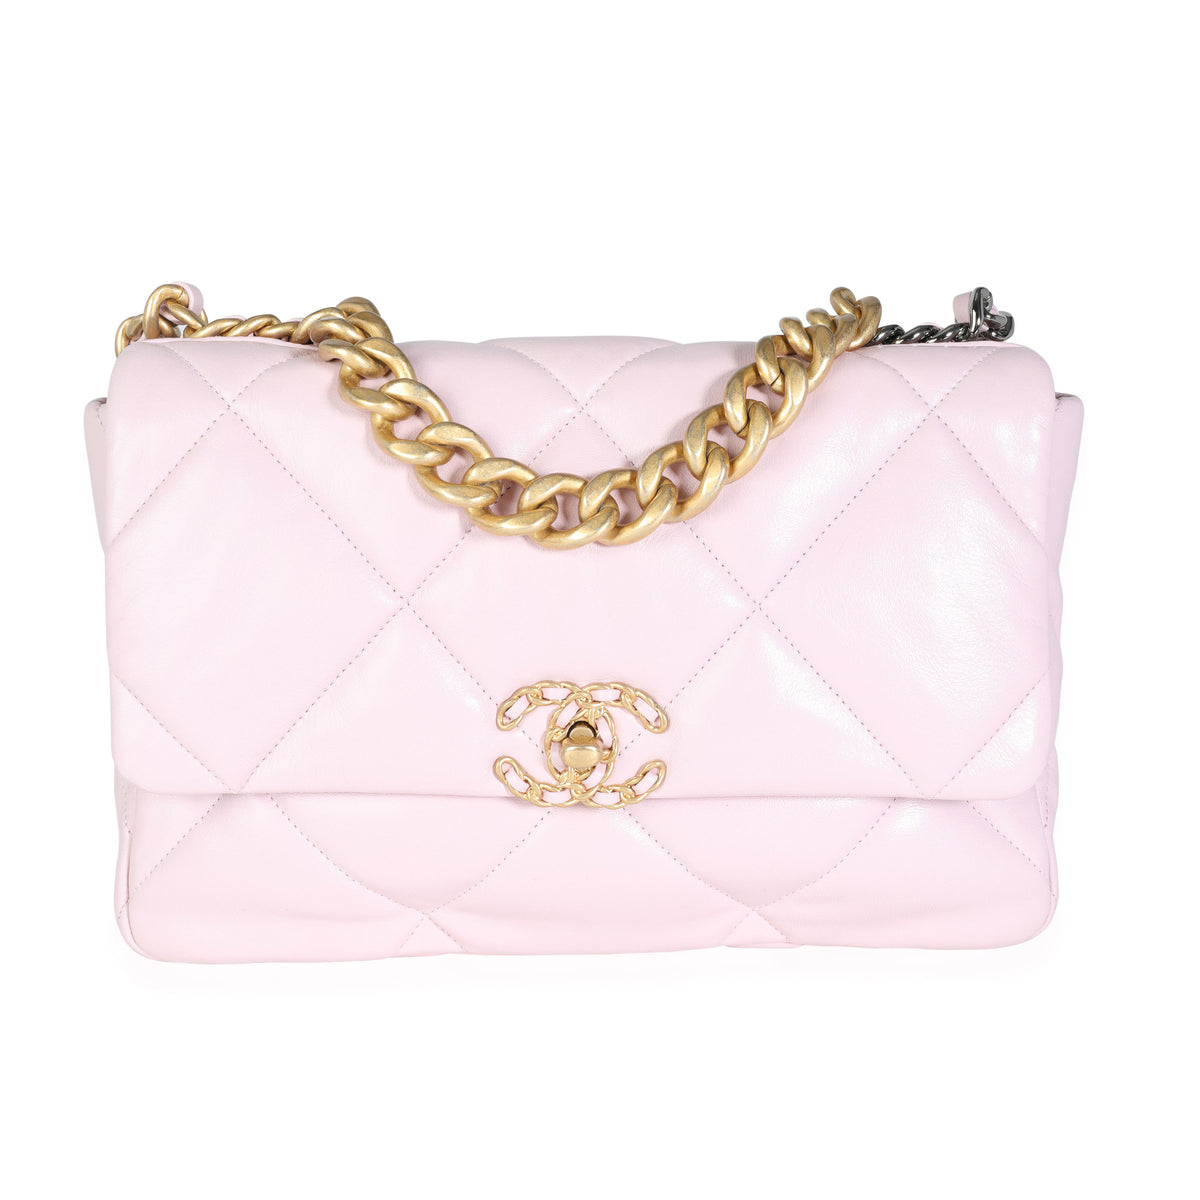 Chanel Light Pink Quilted Lambskin Large Chanel 19 Bag, myGemma, QA